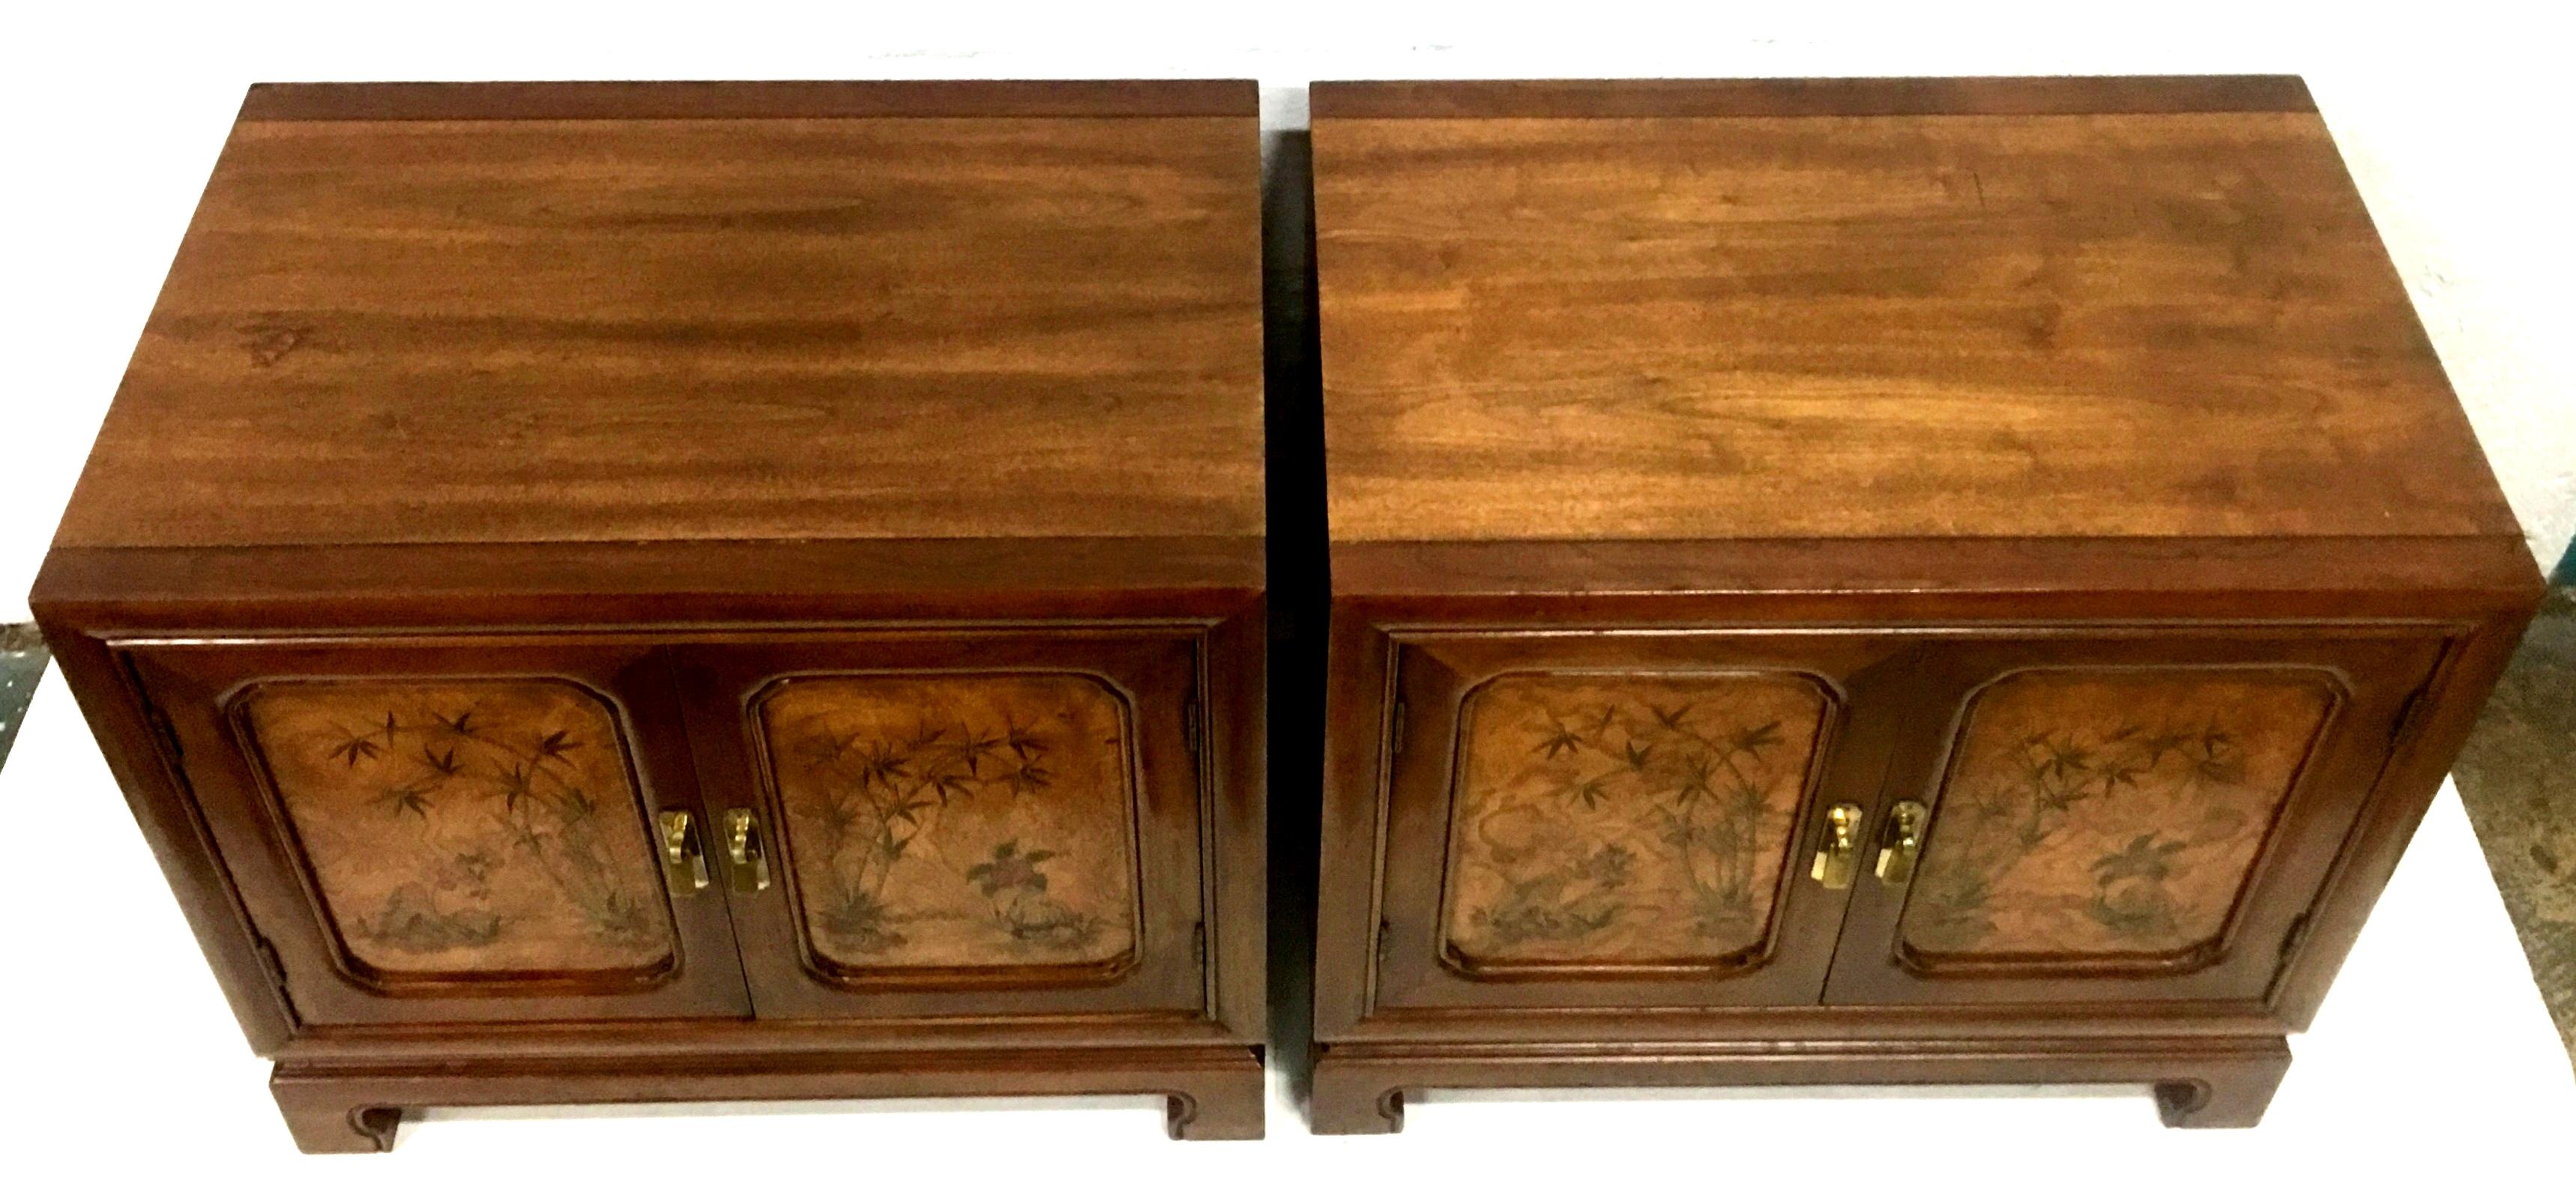 20th Century pair of walnut and burl wood oriental style side tables or nightstands. Features exceptional quality walnut wood with front door panels of burl wood and hand painted Oriental motif. Original burnished solid brass pulls. Each piece